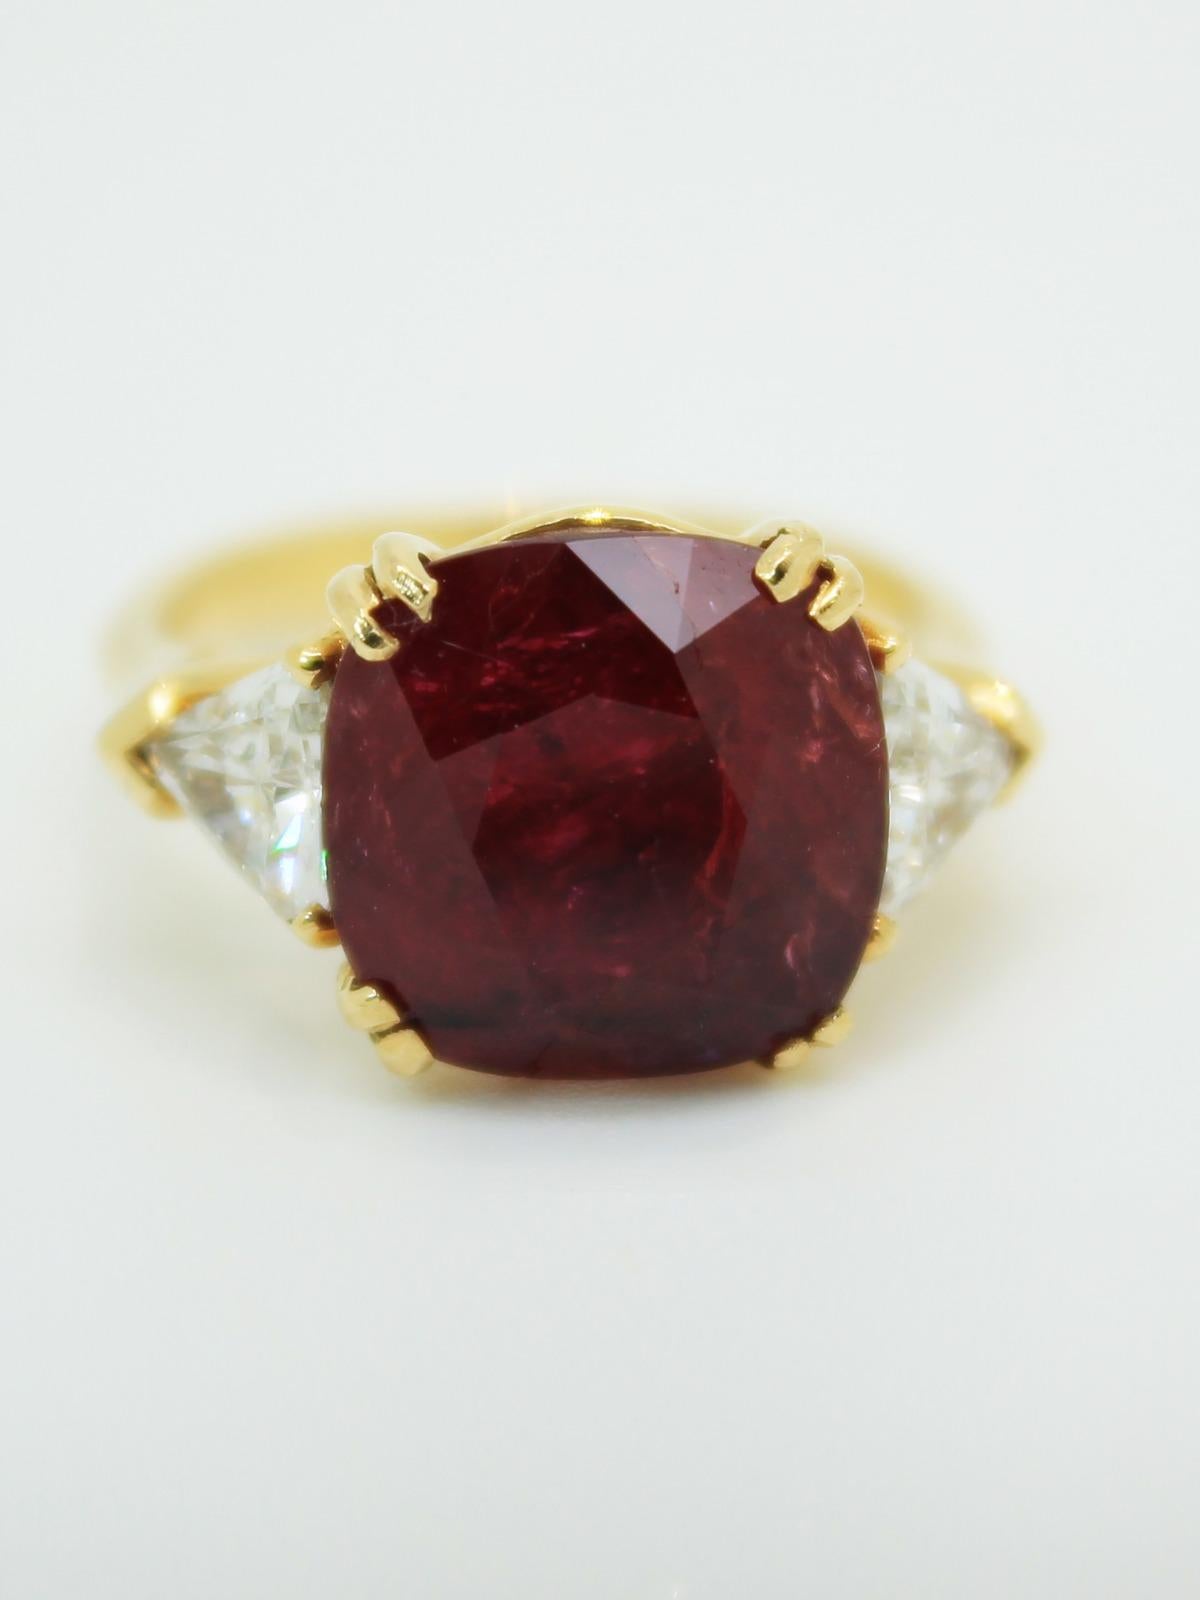 A bespoke and impressive three-stone ruby and diamond ring, set in 18 karat gold. 
The three stone Ruby Cushion Ring flanked by 2 triangular diamonds is a true masterpiece. Crafted with utmost precision and expertise, this exquisite ring showcases